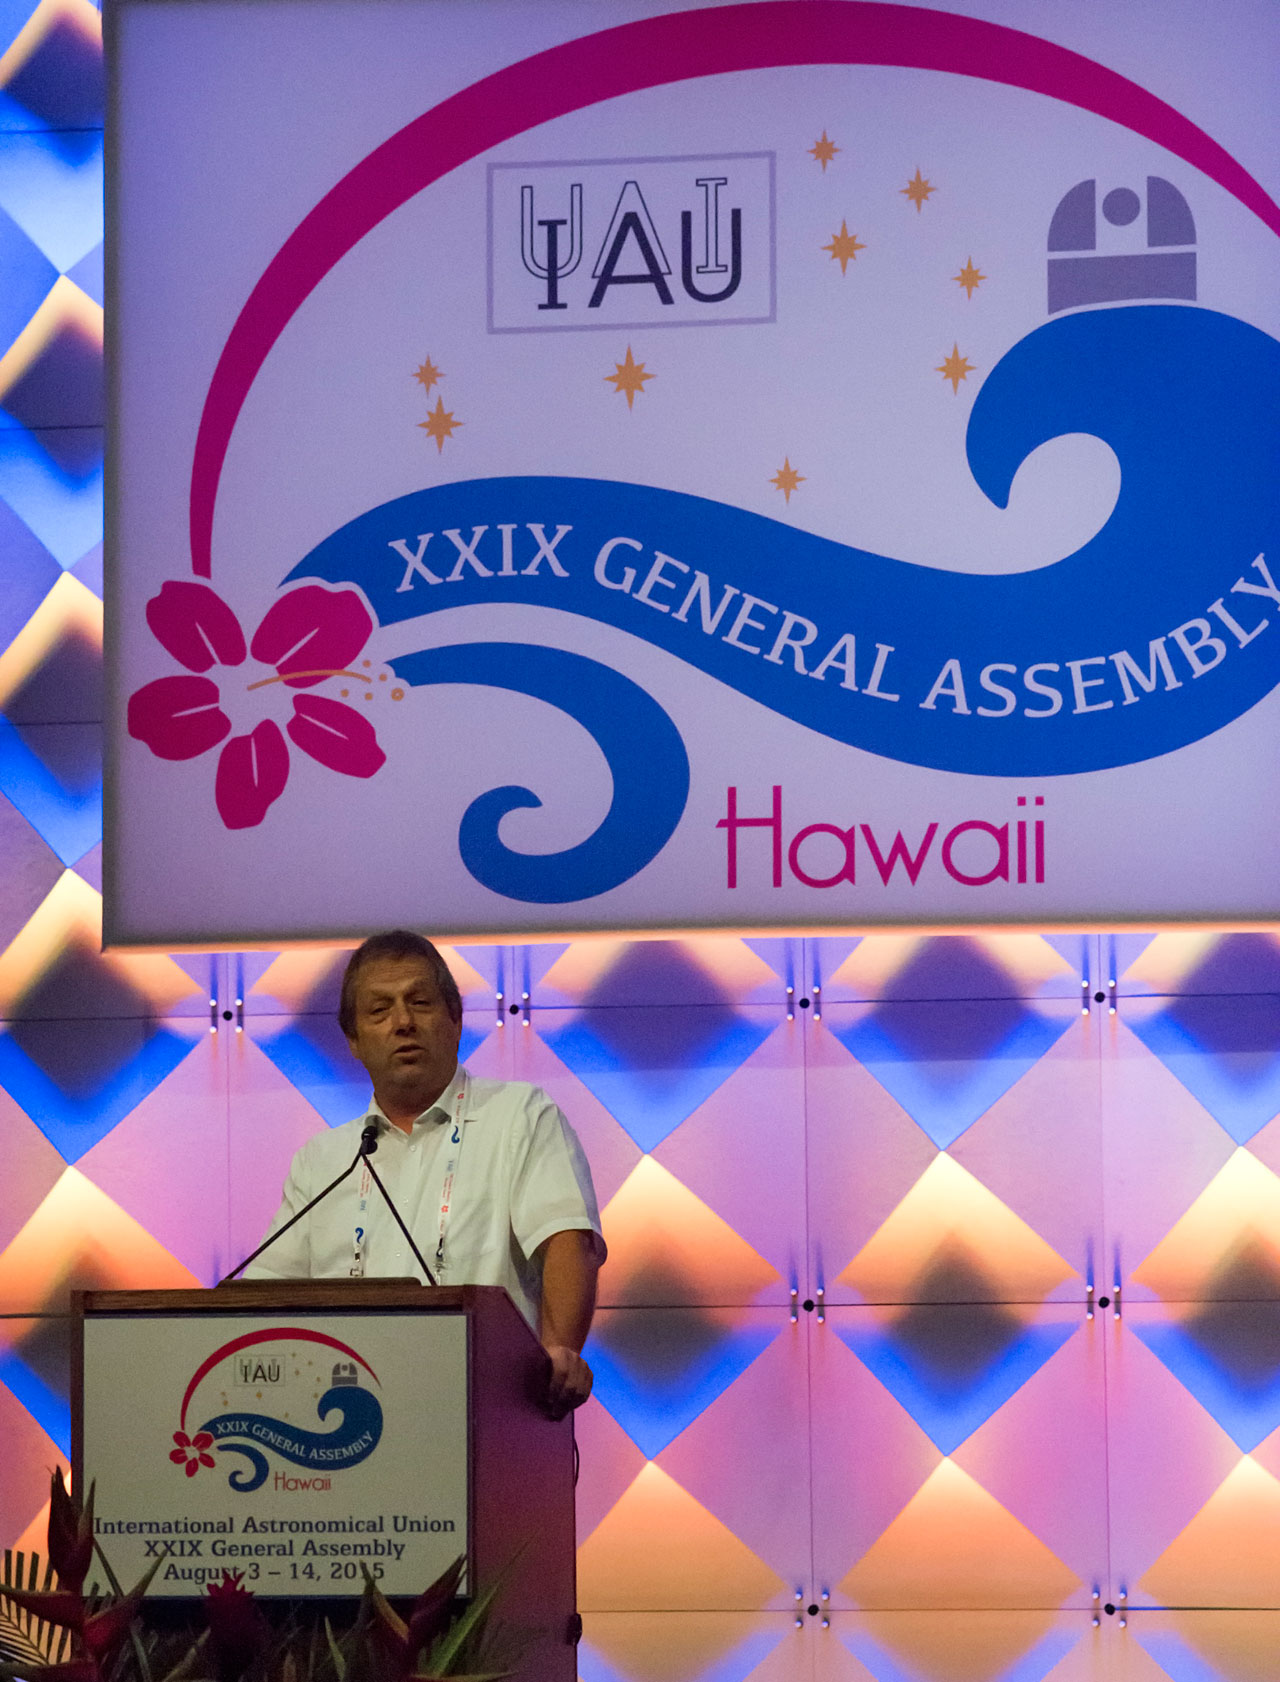 Willy Benz speaking at the IAU XXIX General Assembly